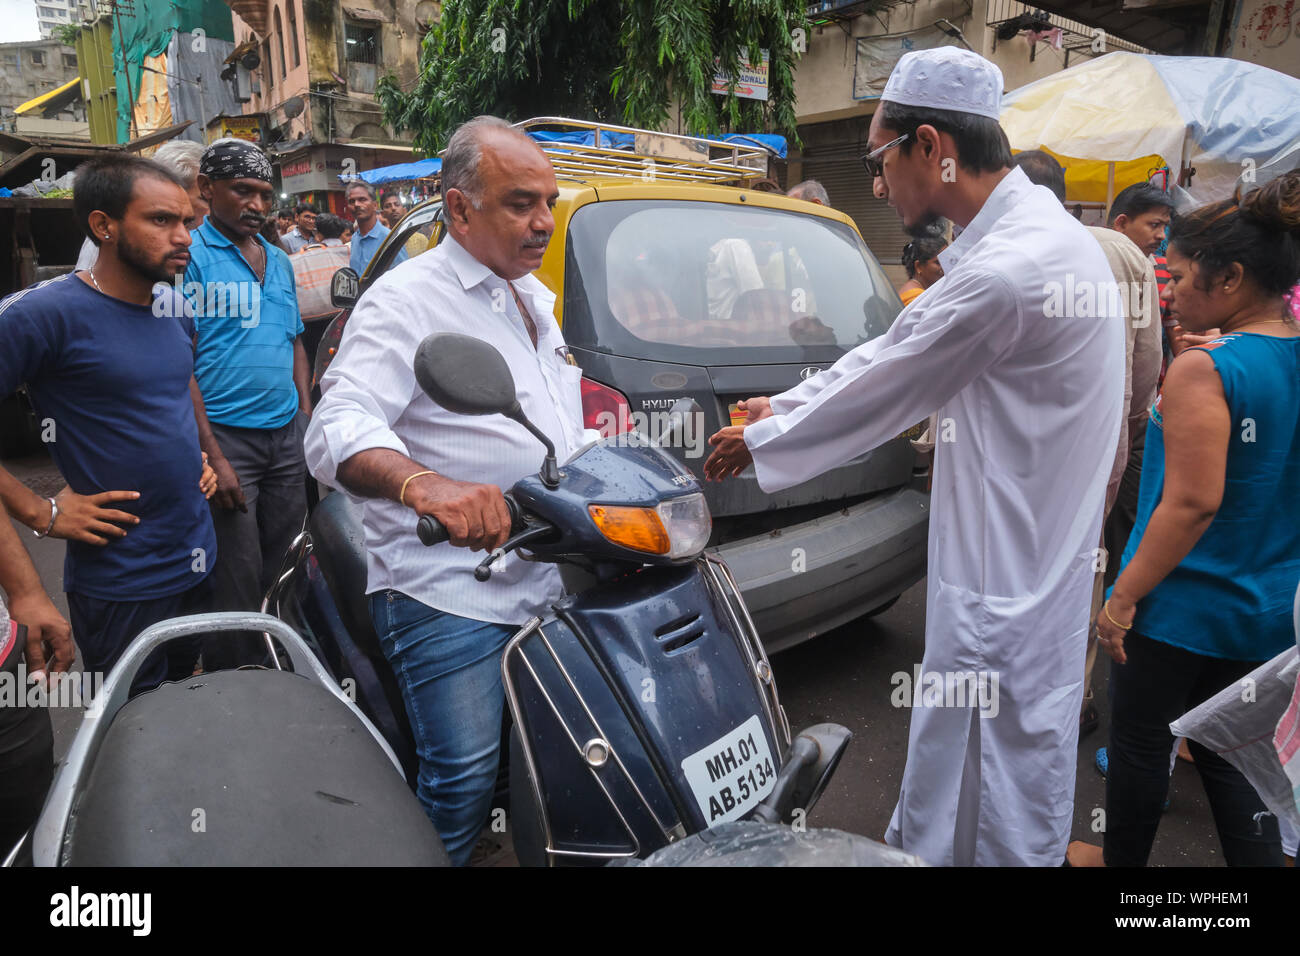 Look what you've done to my taxi: A traffic dispute arises in a congested lane in Mumbai, India, between a taxi driver (r) and a scooter driver Stock Photo